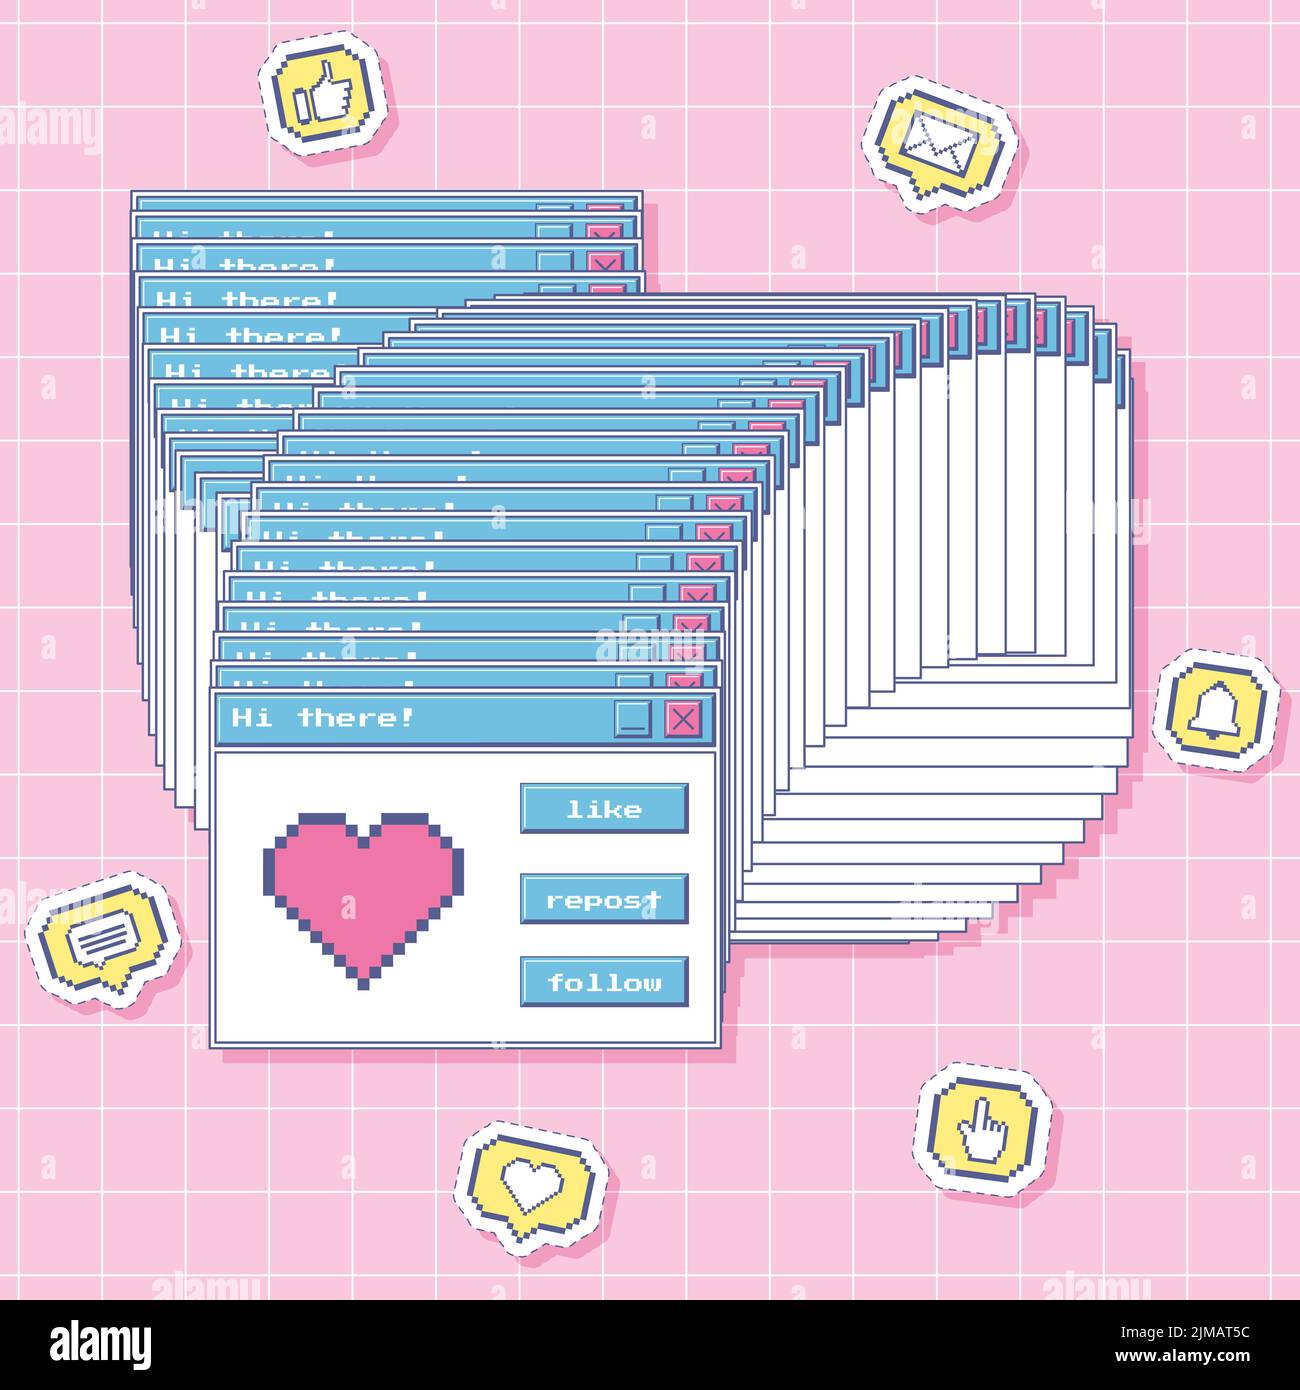 Frozen window with pixel art heart and retro user interface buttons. Pixel icons stickers - comment, like, heart, bell, message.Nostalgic y2k aestheti Stock Vector